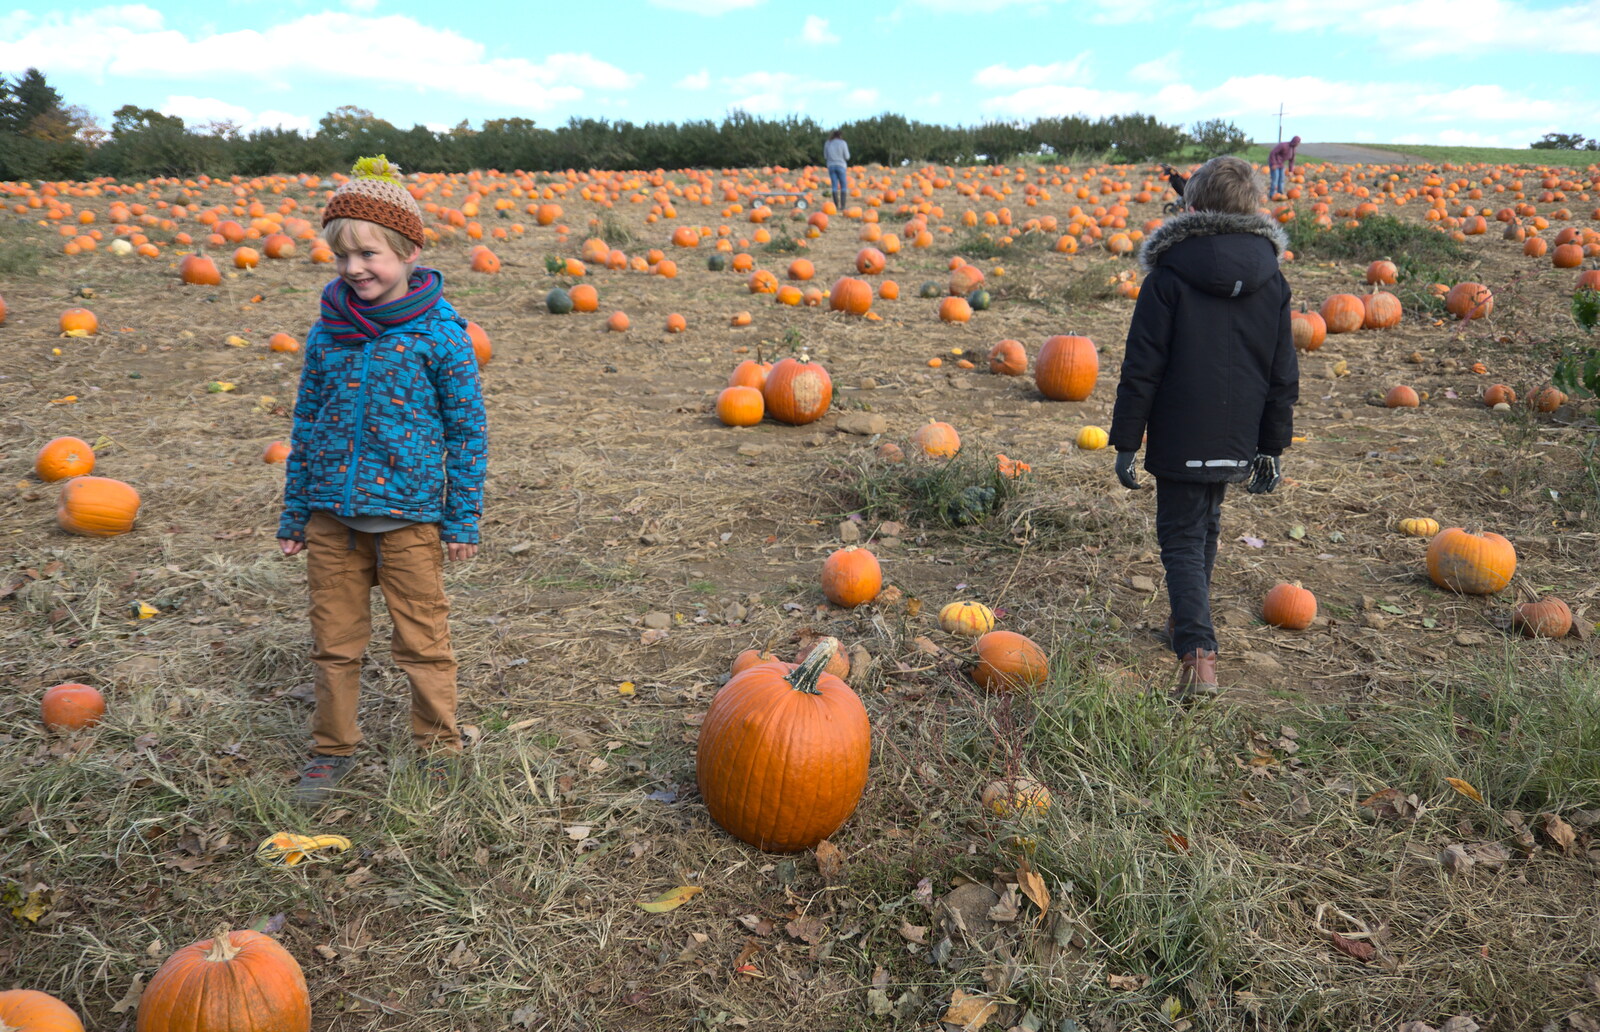 The boys are overwhelmed by the pumpkins on offer from Pumpkin Picking at Alstede Farm, Chester, Morris County, New Jersey - 24th October 2018